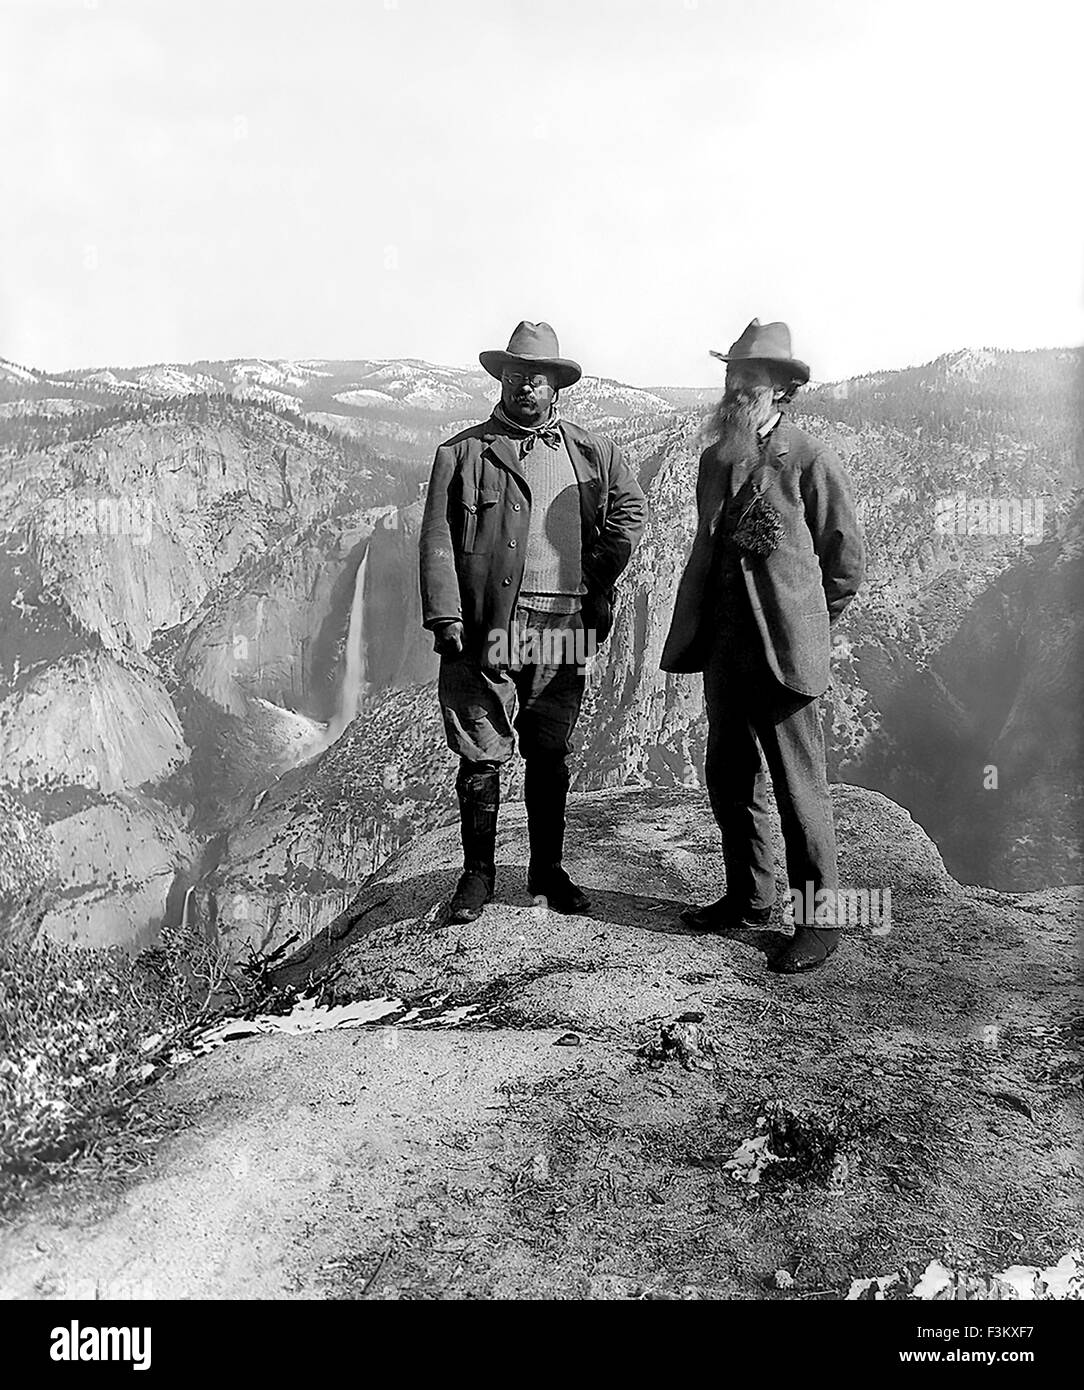 JOHN MUIR pioneer conservationist at right with US President Theodore Roosevelt on Glacier Point in Yellowstone National Park in 1906. The Yosemite Falls are in the background. Photo Underwood and Underwood Stock Photo